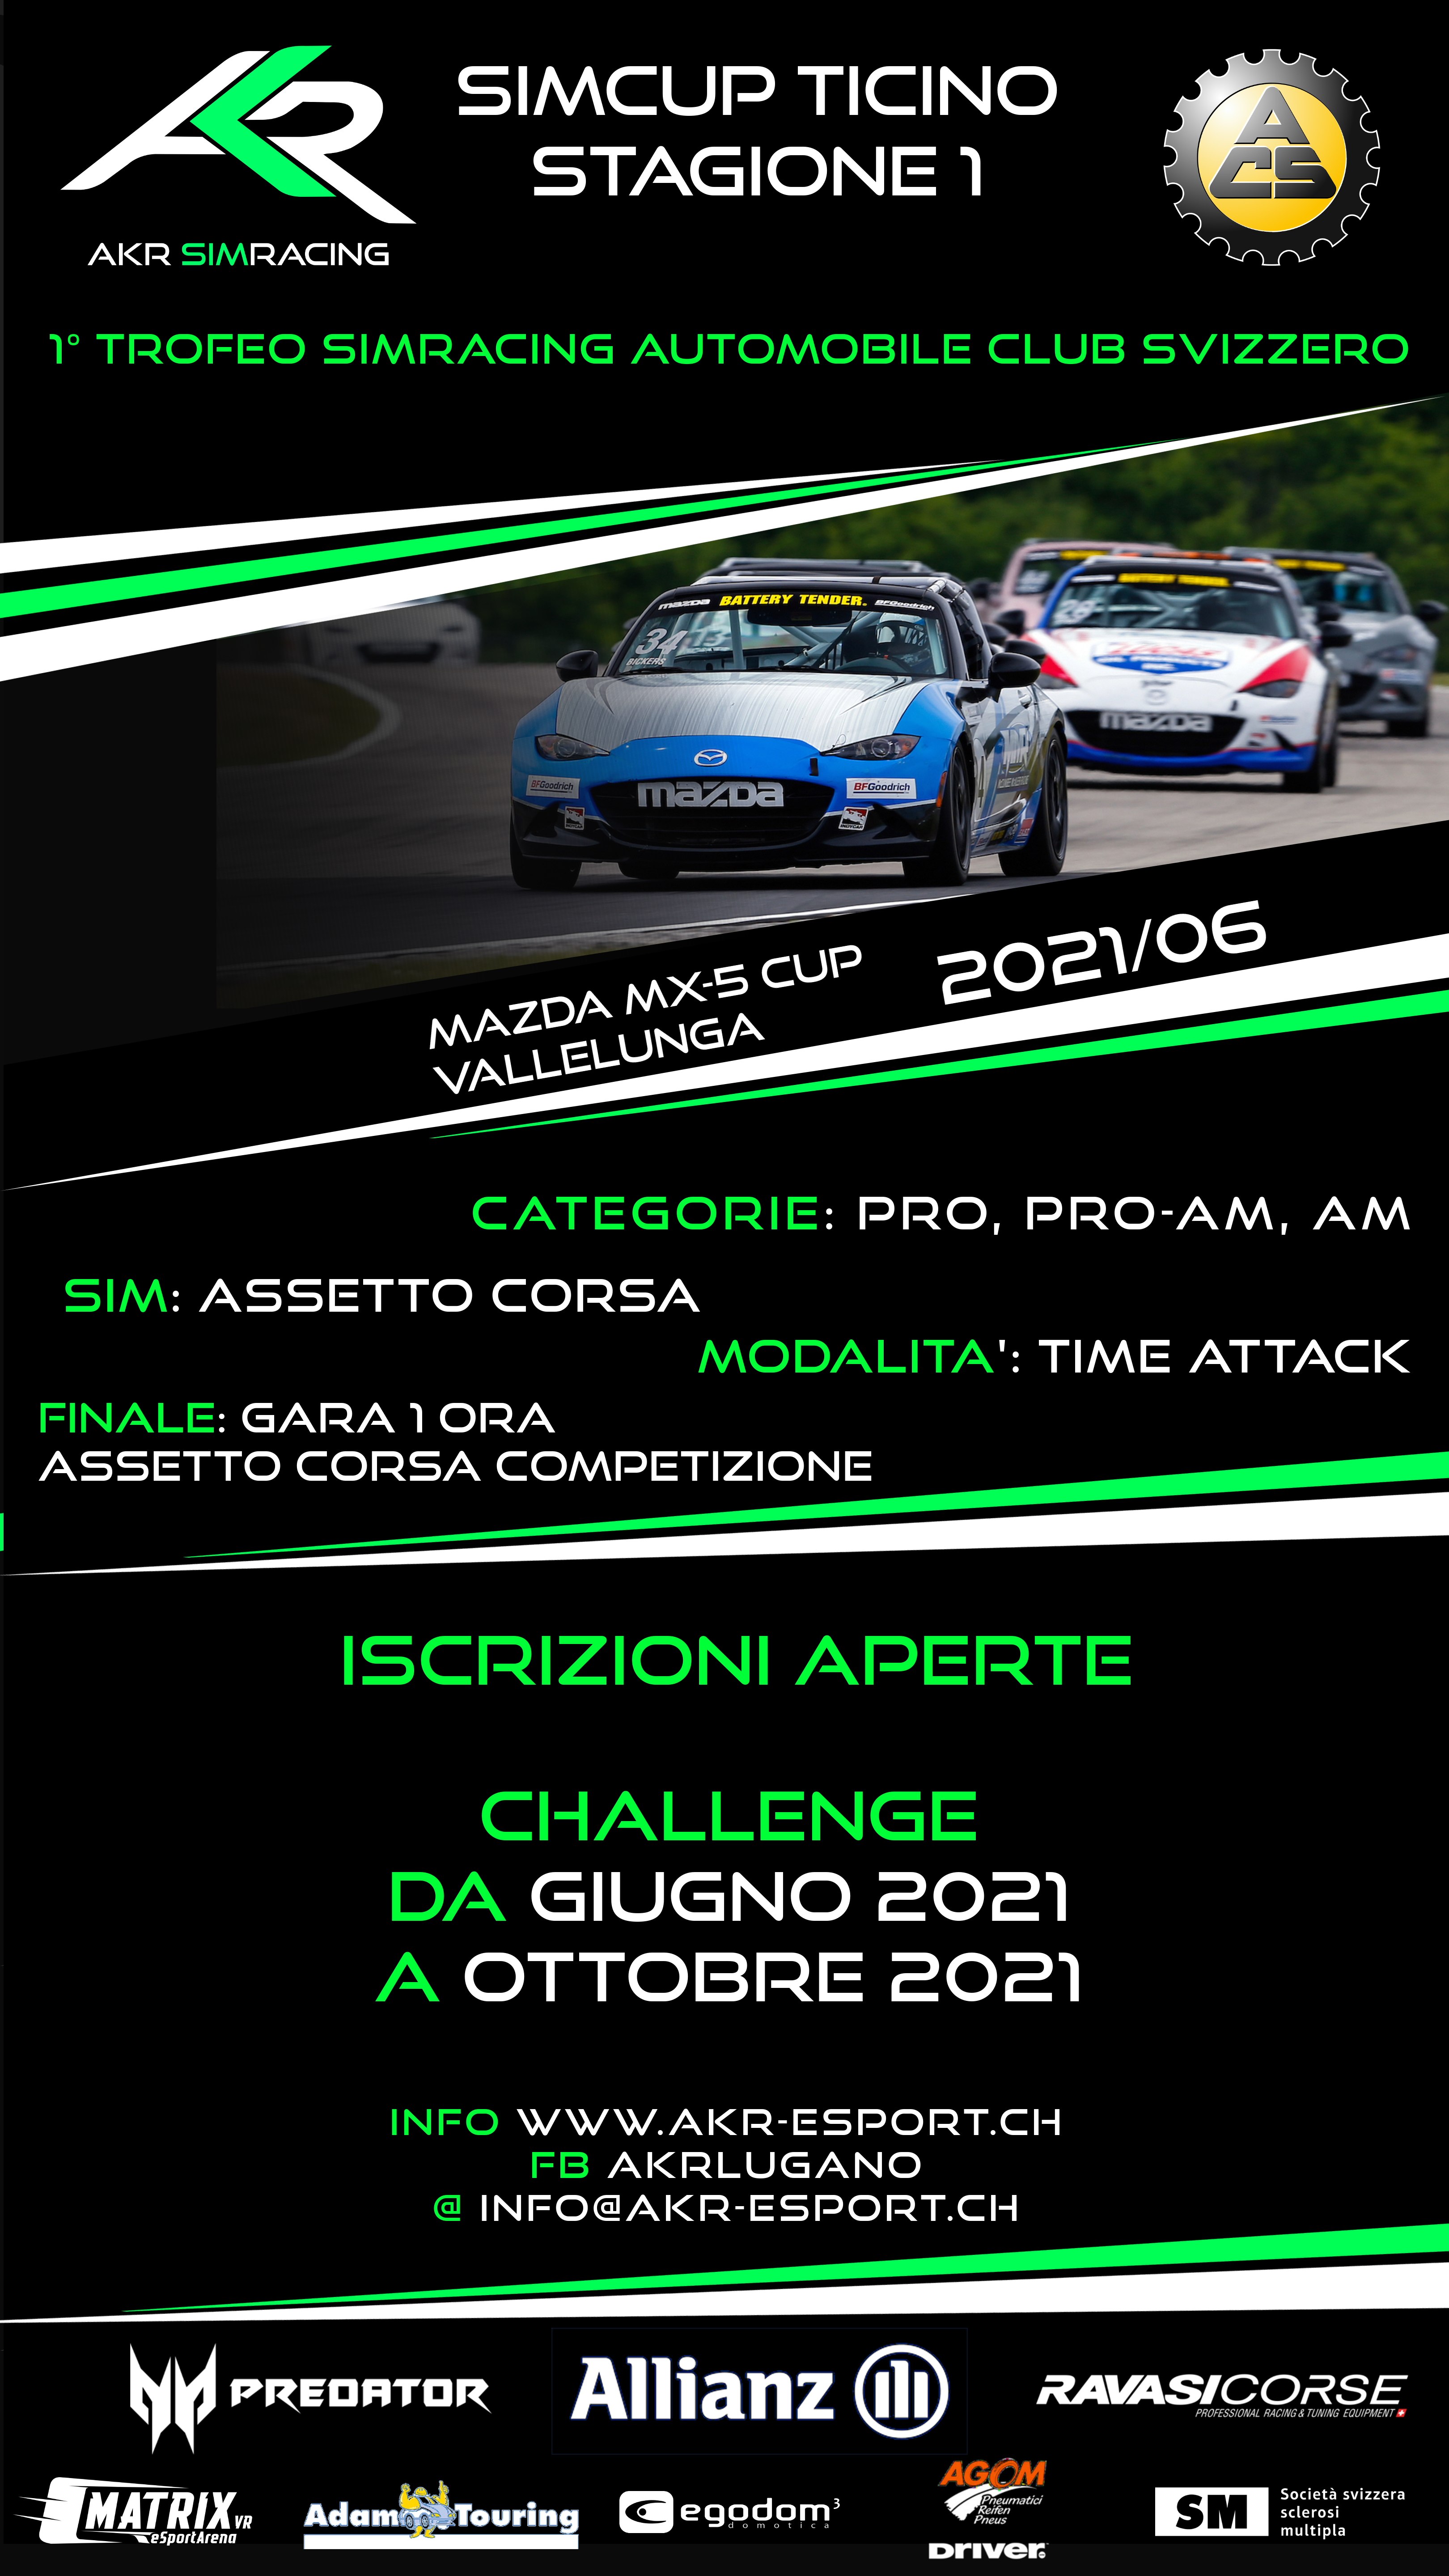 SIMCUP TICINO Mazda MX-5 Cup